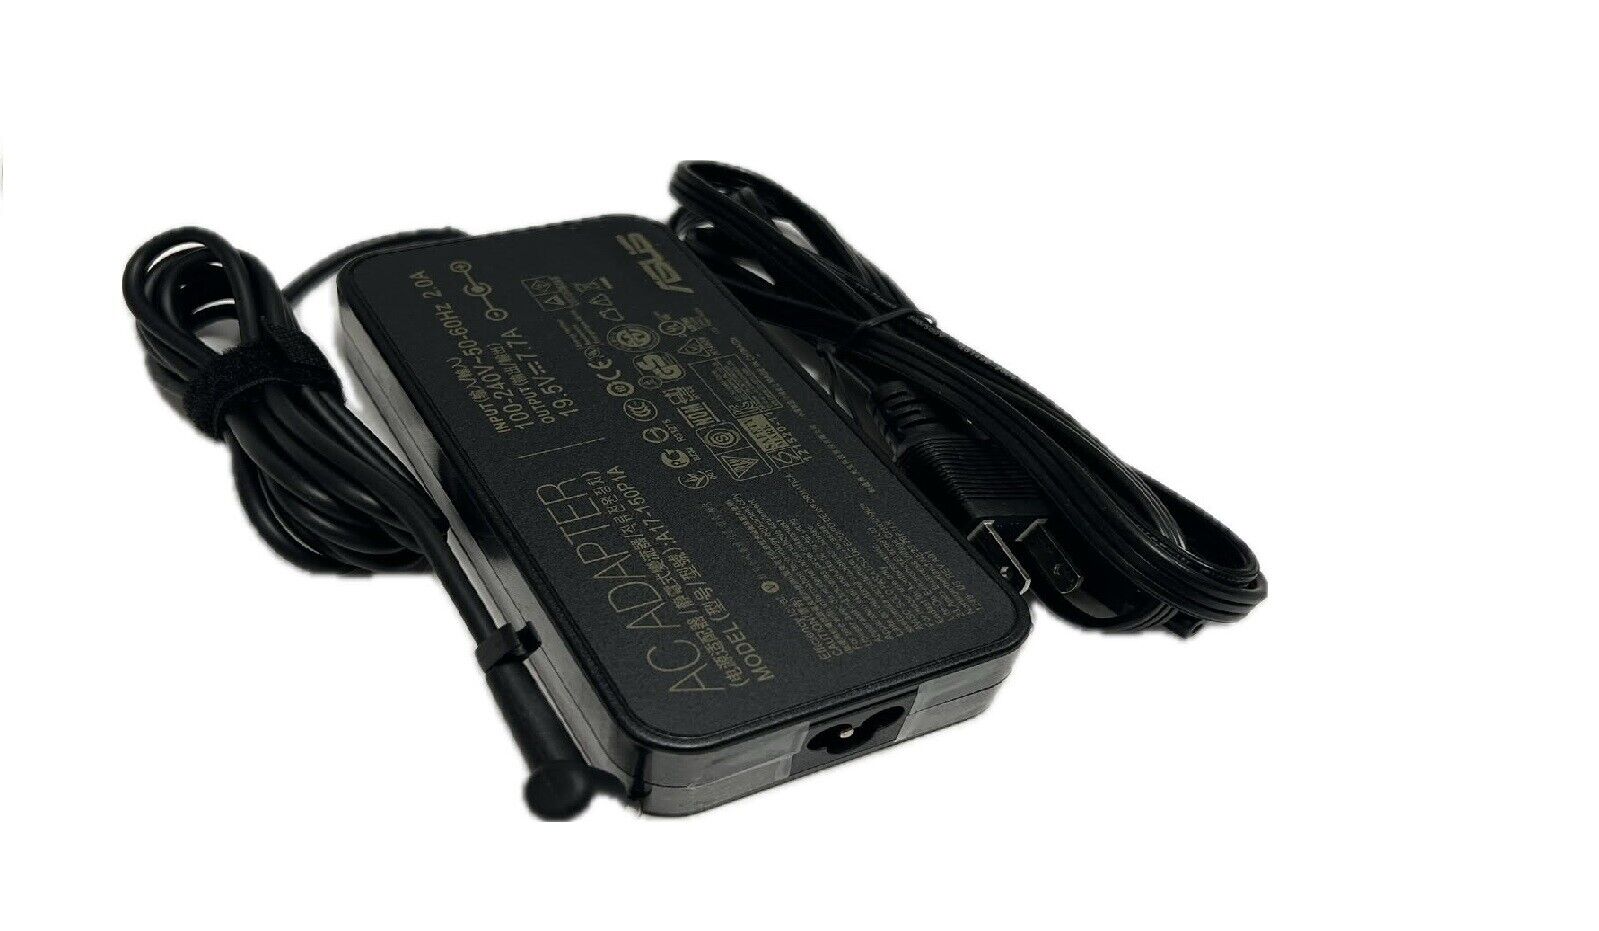 ASUS 150W Power Adapter Charger 19.5V 7.7A A17-150P1A For ASUS ROG GL503G G53J